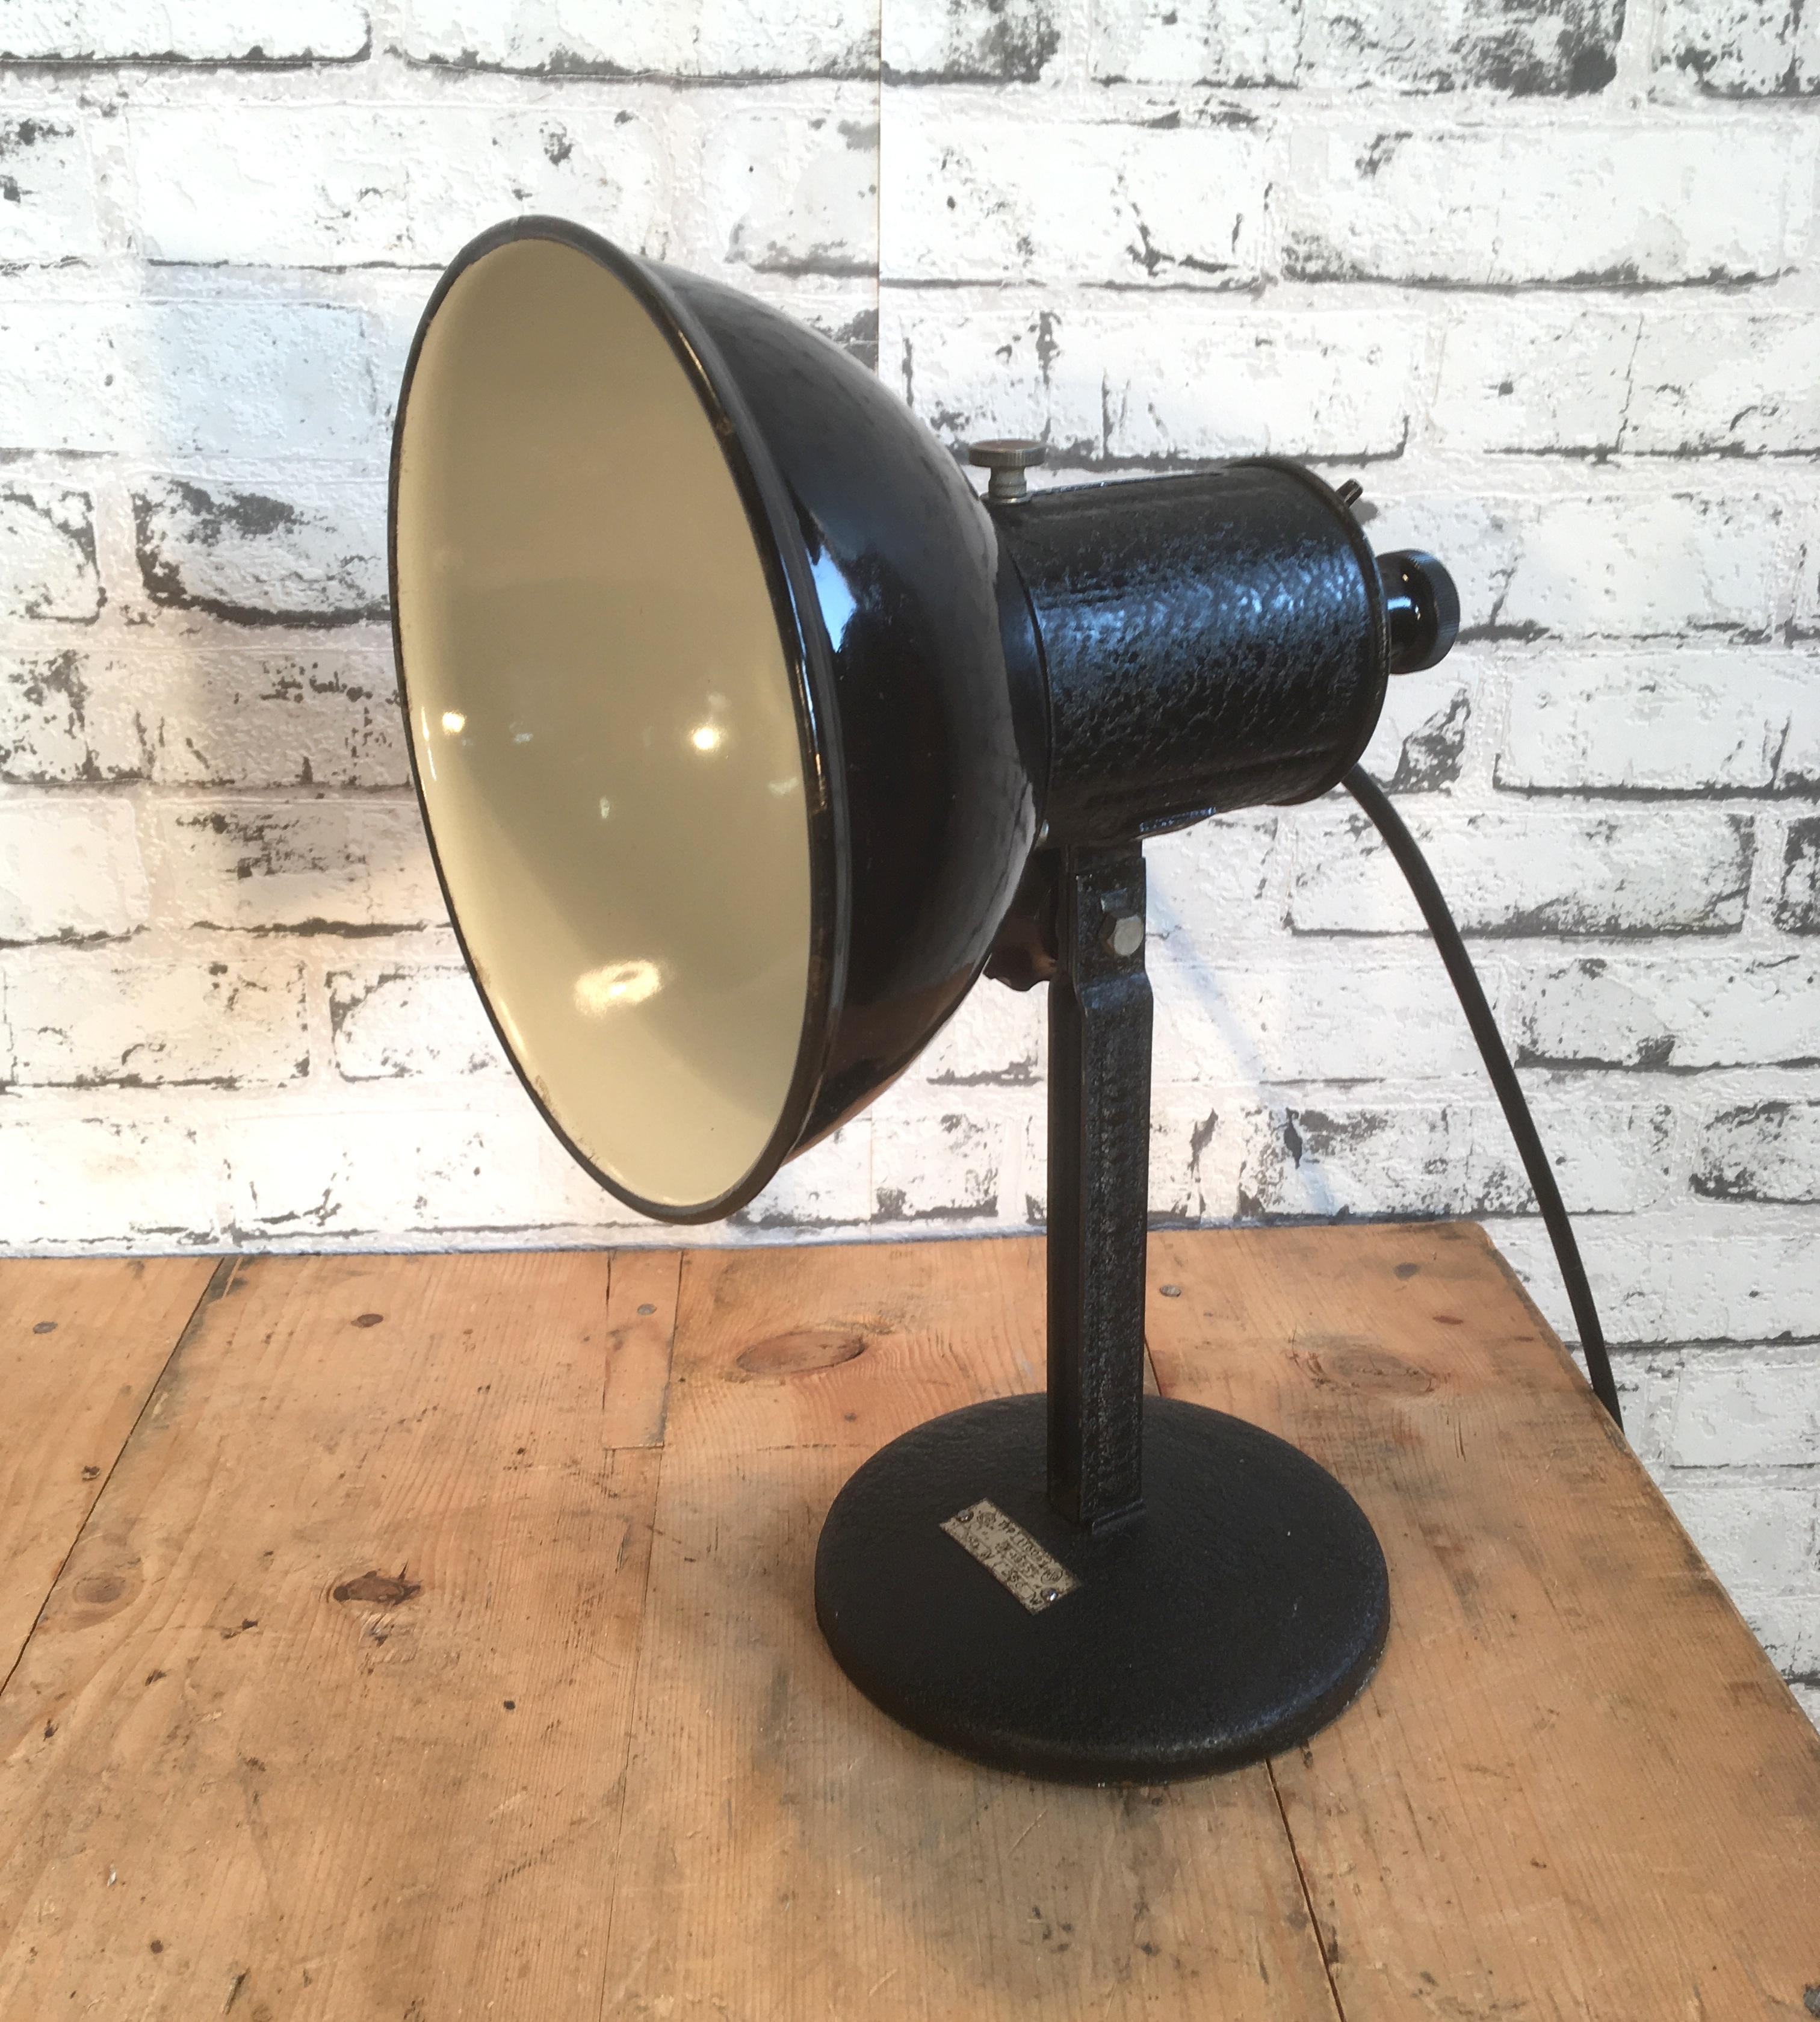 Industrial table lamp from former Czechoslovakia made during the 1950s. It features adjustable black enemal shade, white interior. Iron base. Porcelain socket for E 27 lightbulbs, new wire. Very good vintage condition. Fully functional.